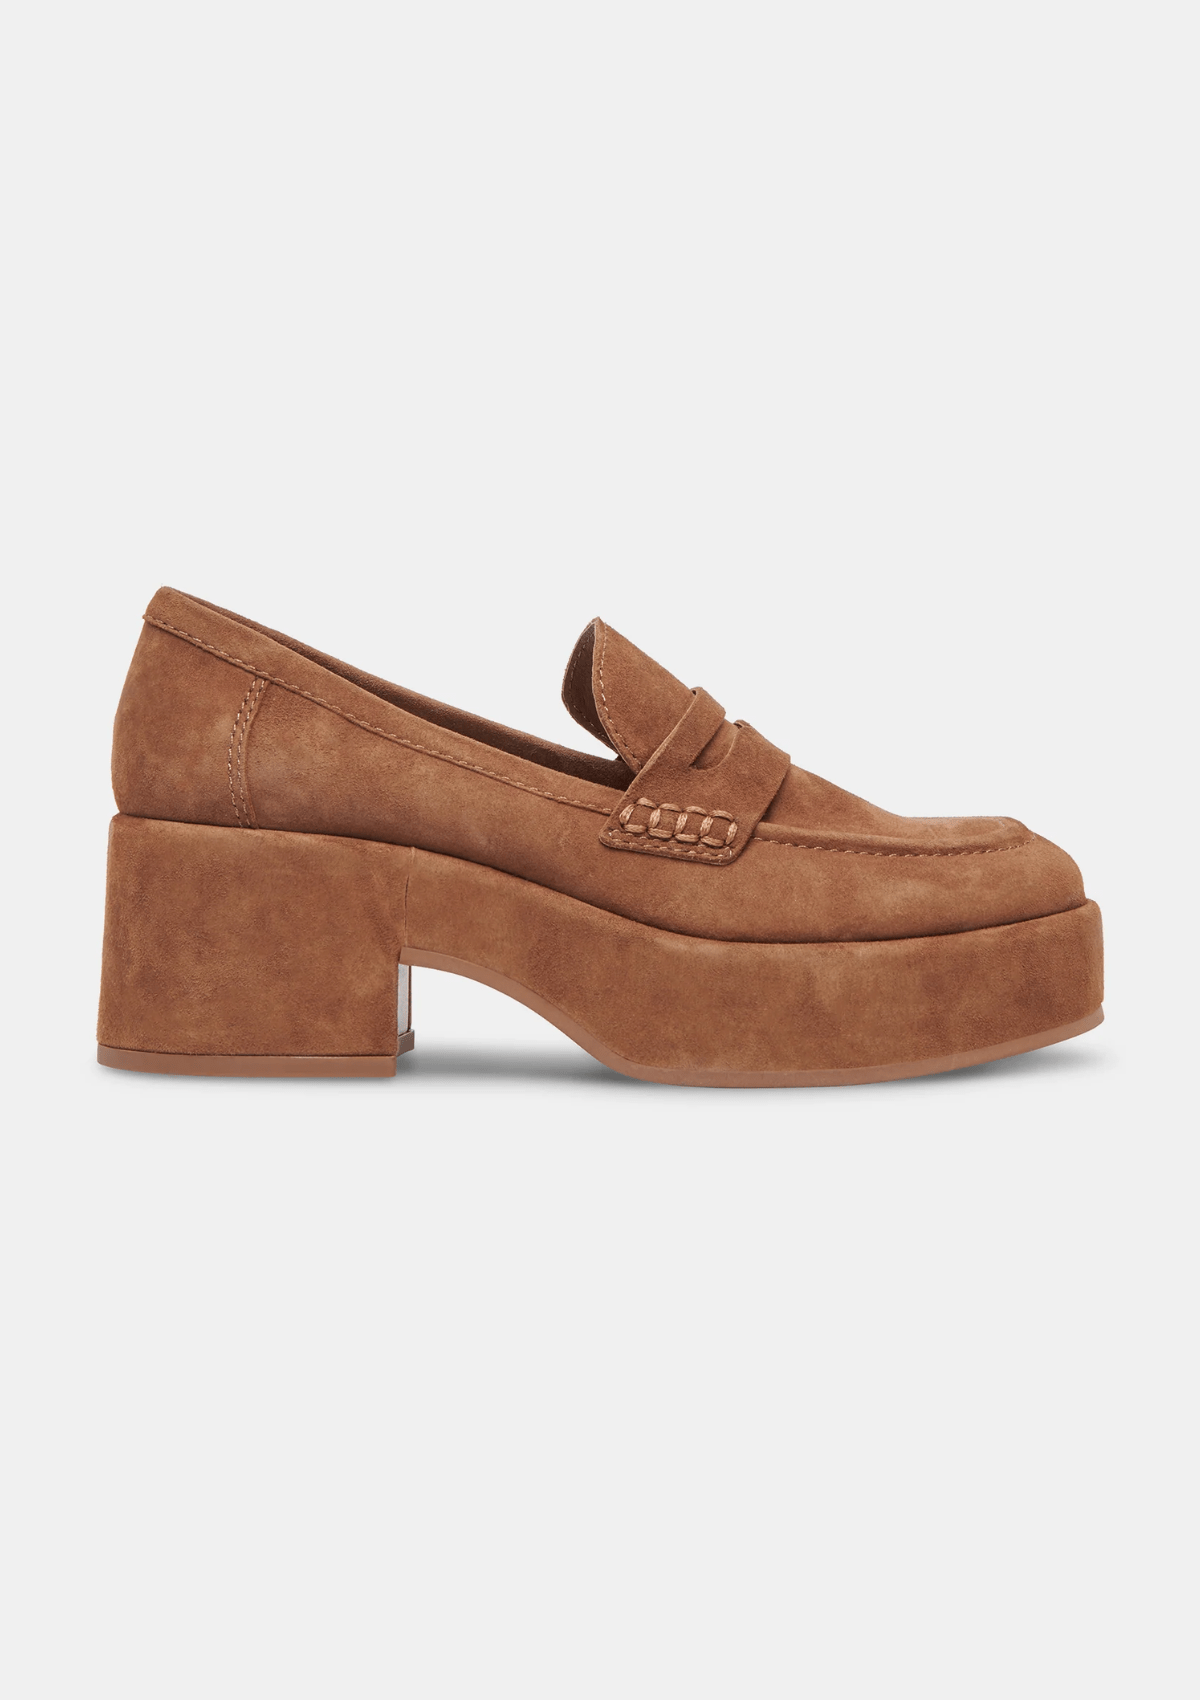 Chestnut Suede Yanni Loafers with Chunky Sole and Exaggerated Heel -Dolce Vita Footwear, Inc.- Ruby Jane-